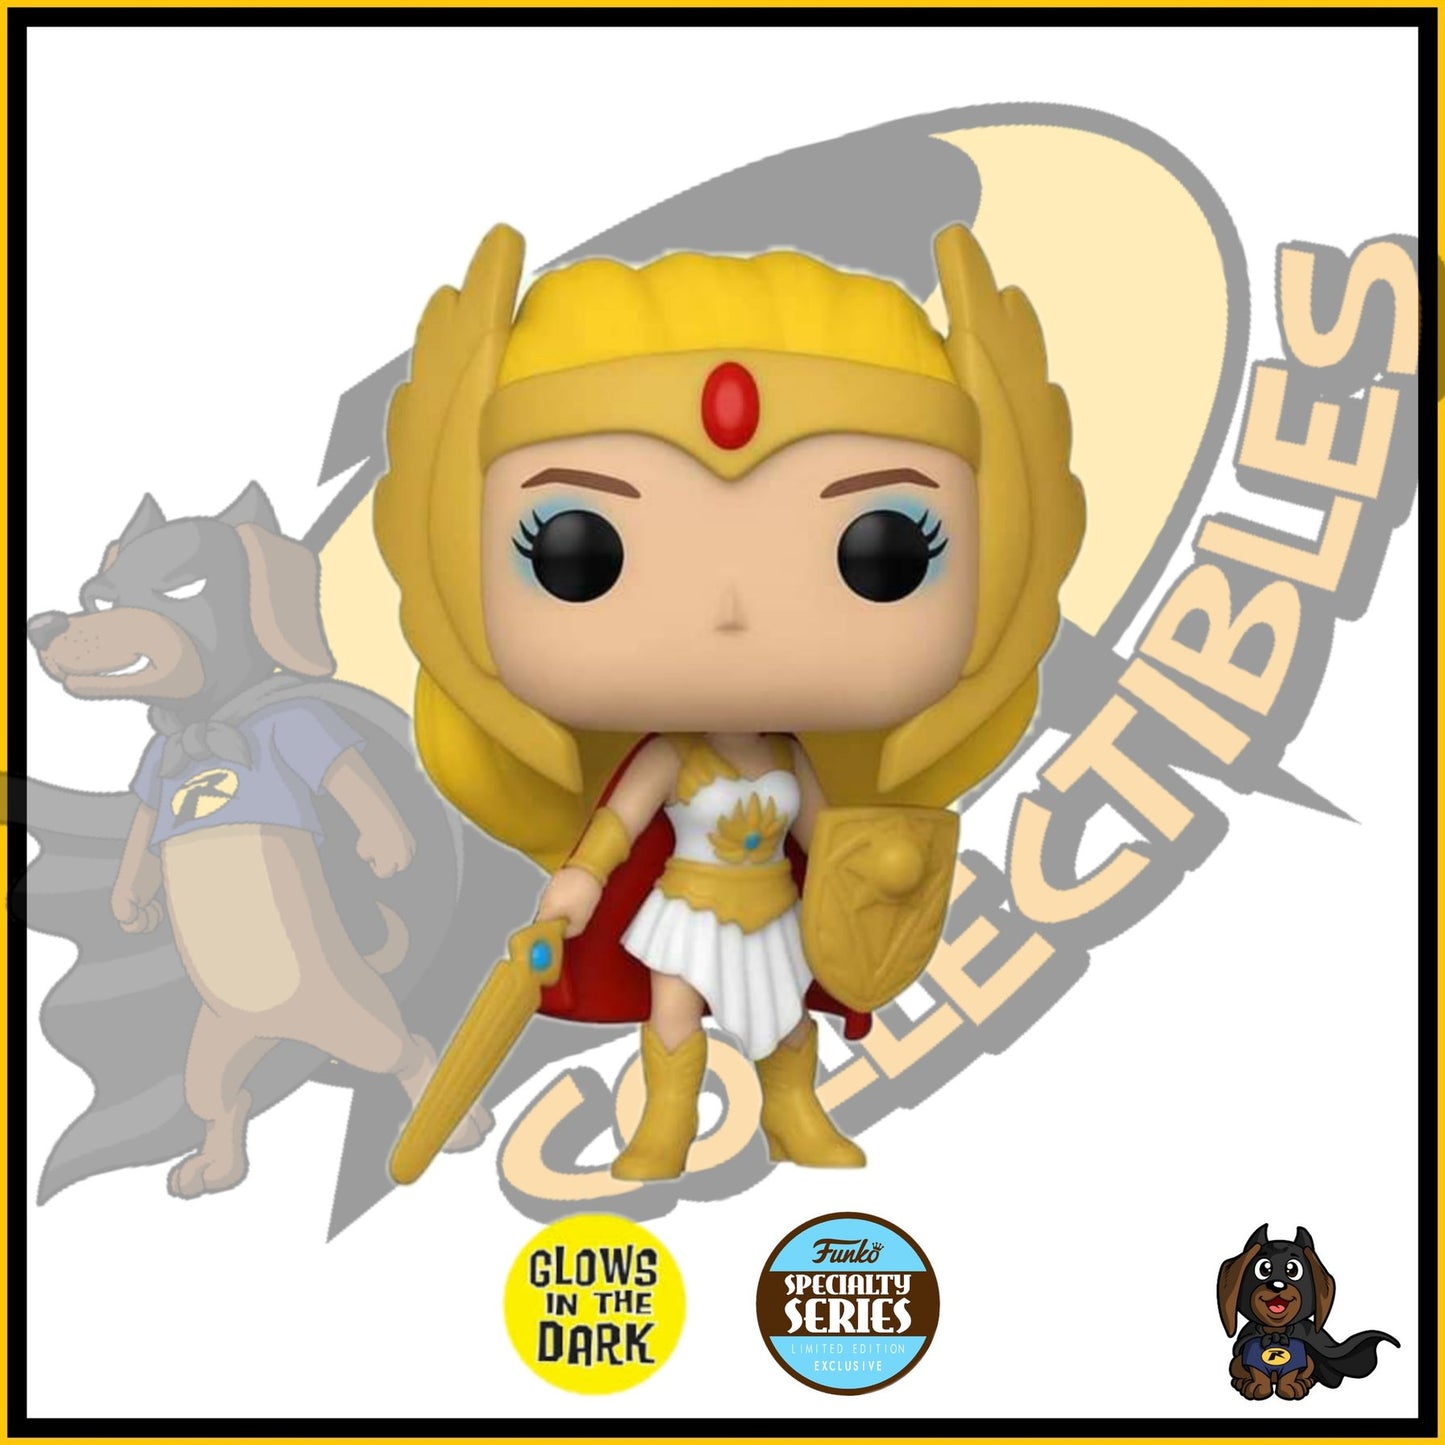 On Hand She-Ra Specialty Series Funko Pop!